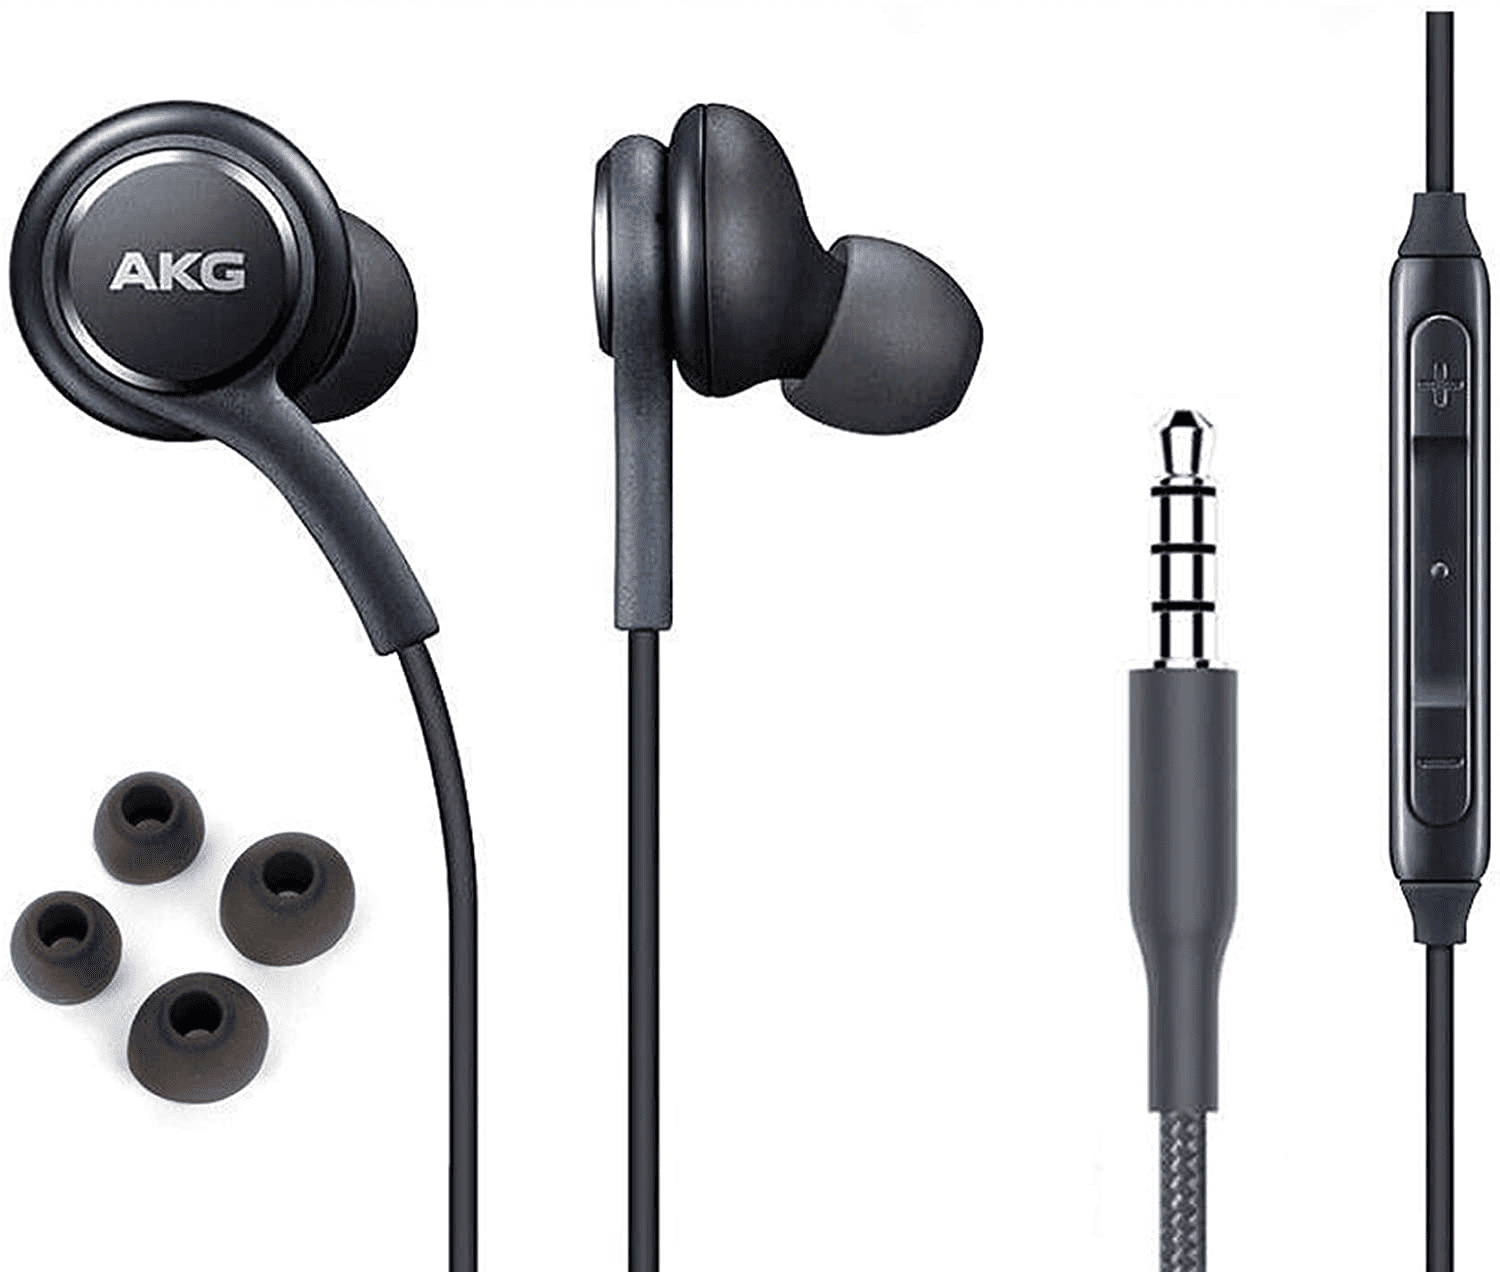 Oem Urbanx Corded Stereo Headphones For Samsung Galaxy J2 Pro 16 Akg Tuned With Microphone And Volume Buttons Grey Walmart Com Walmart Com